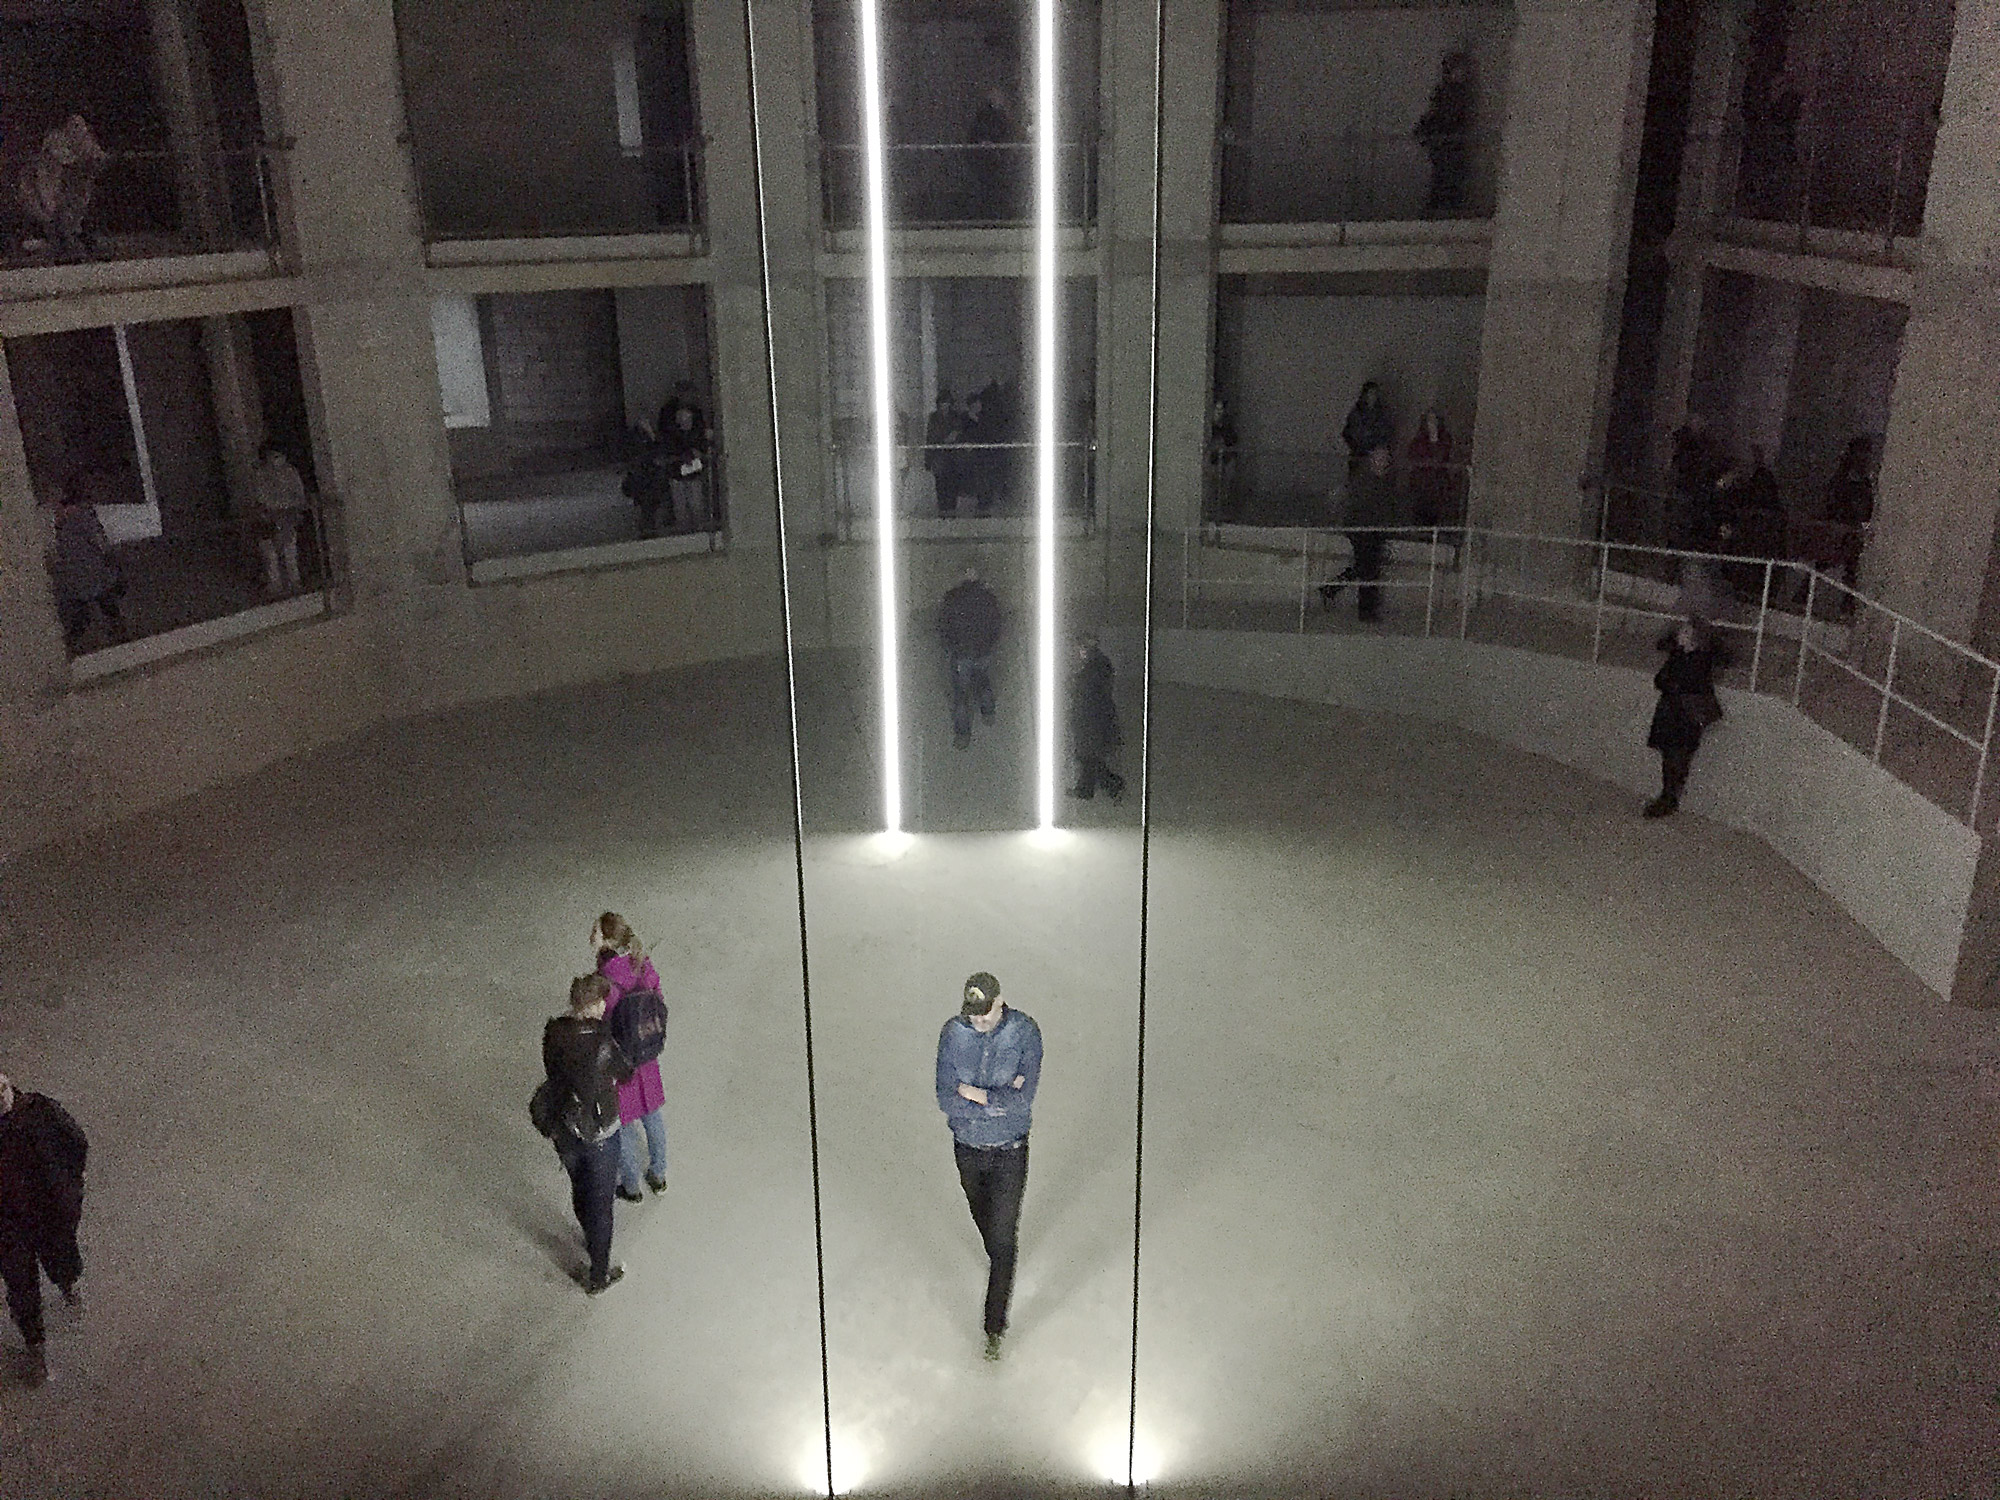 People walk around a large concrete space with apertures on two floors. There are vertical beams of light, cast up from the floor.